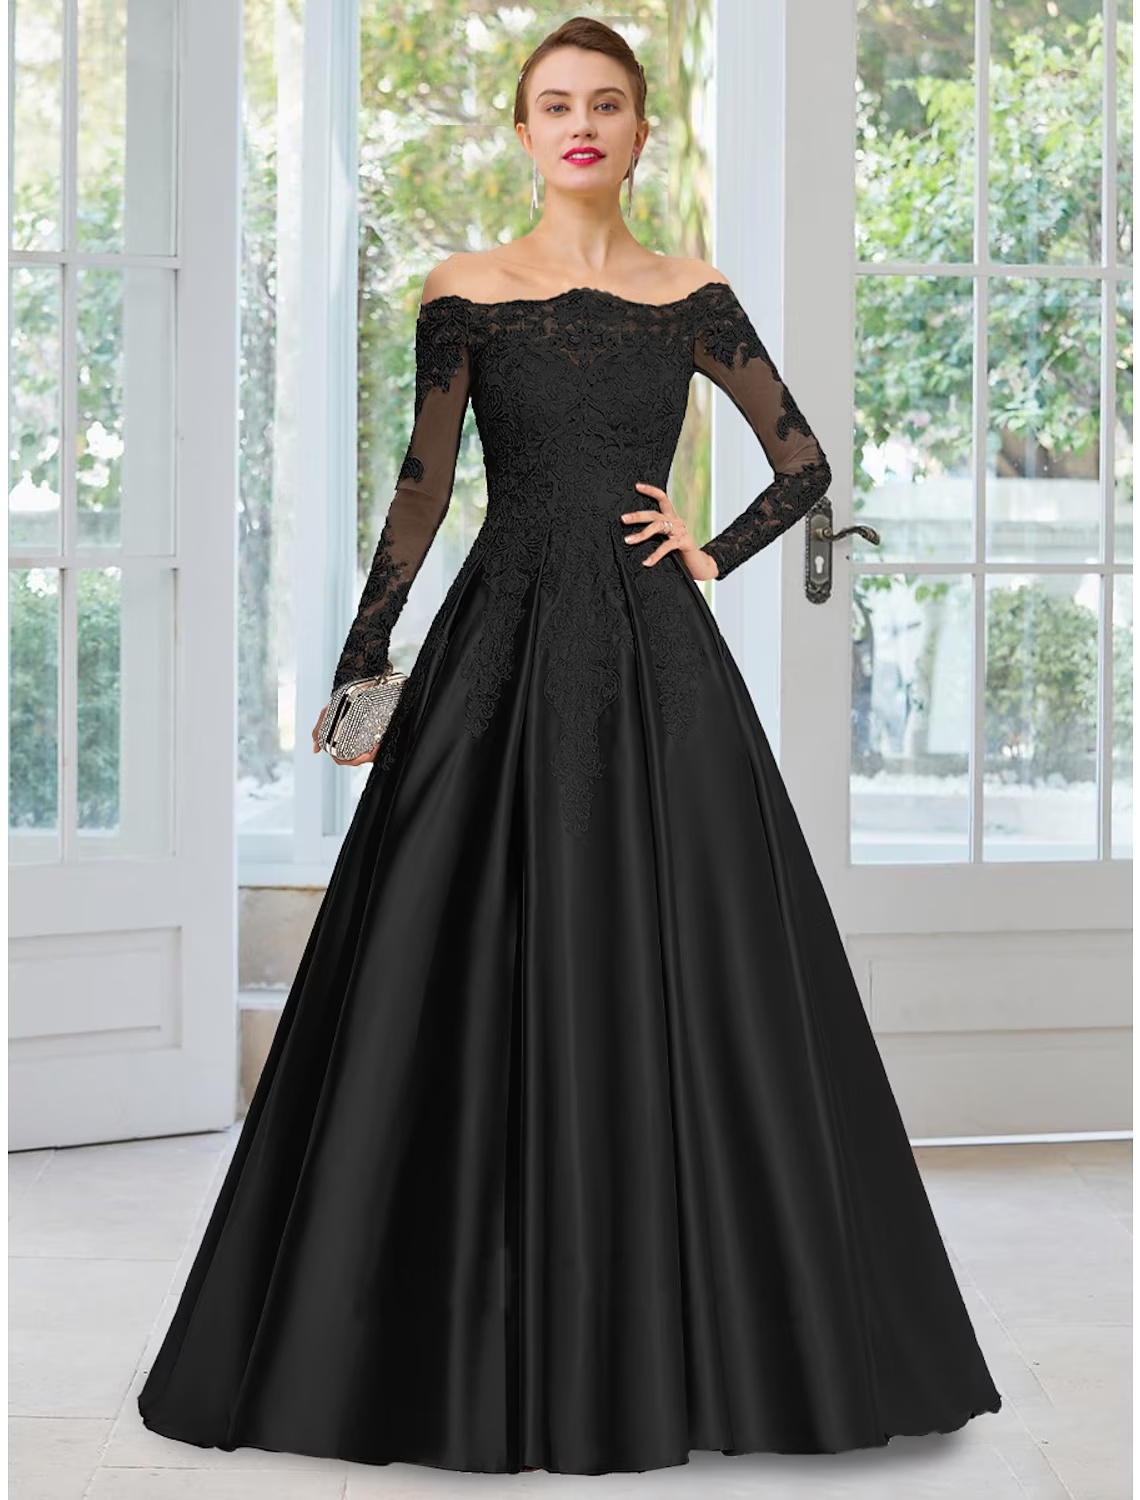 A-Line Evening Gown Black Dress Formal Court Train Long Sleeve Off Shoulder Lace with Appliques